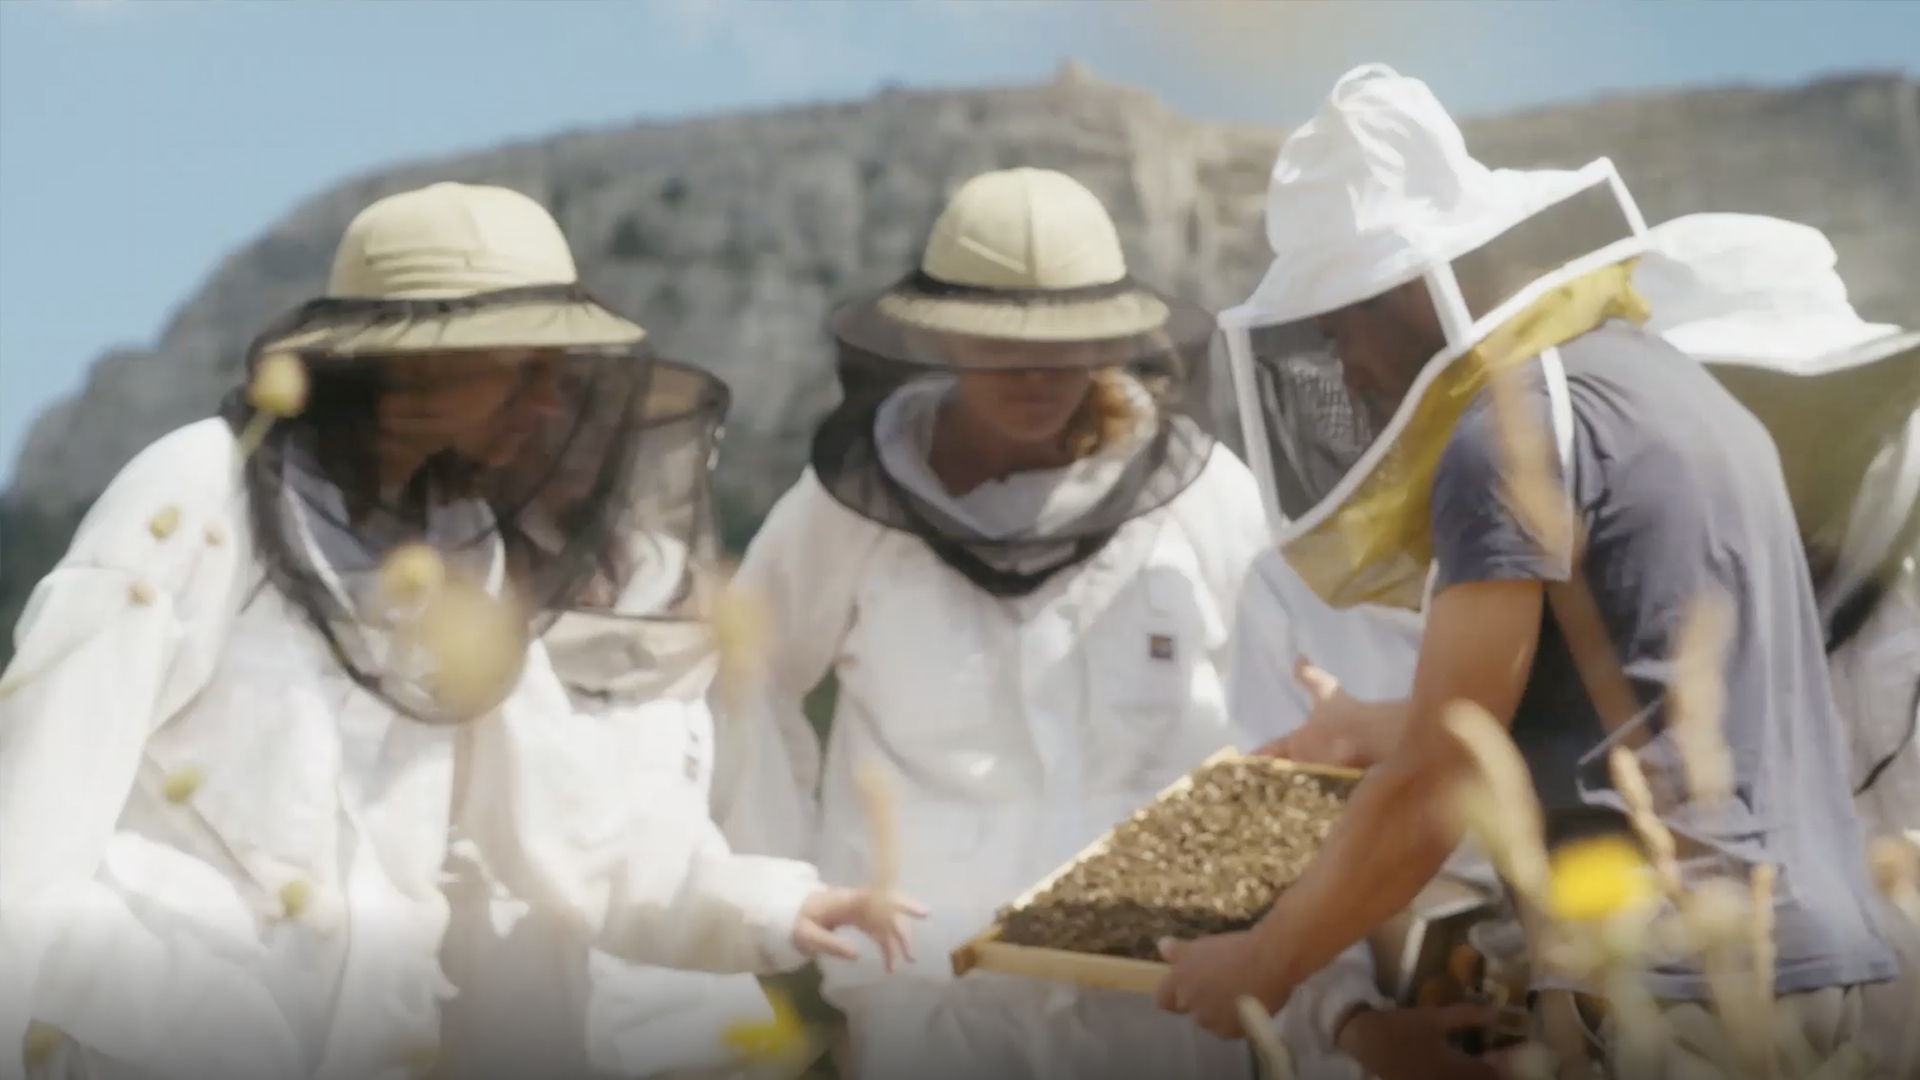 Women for bees